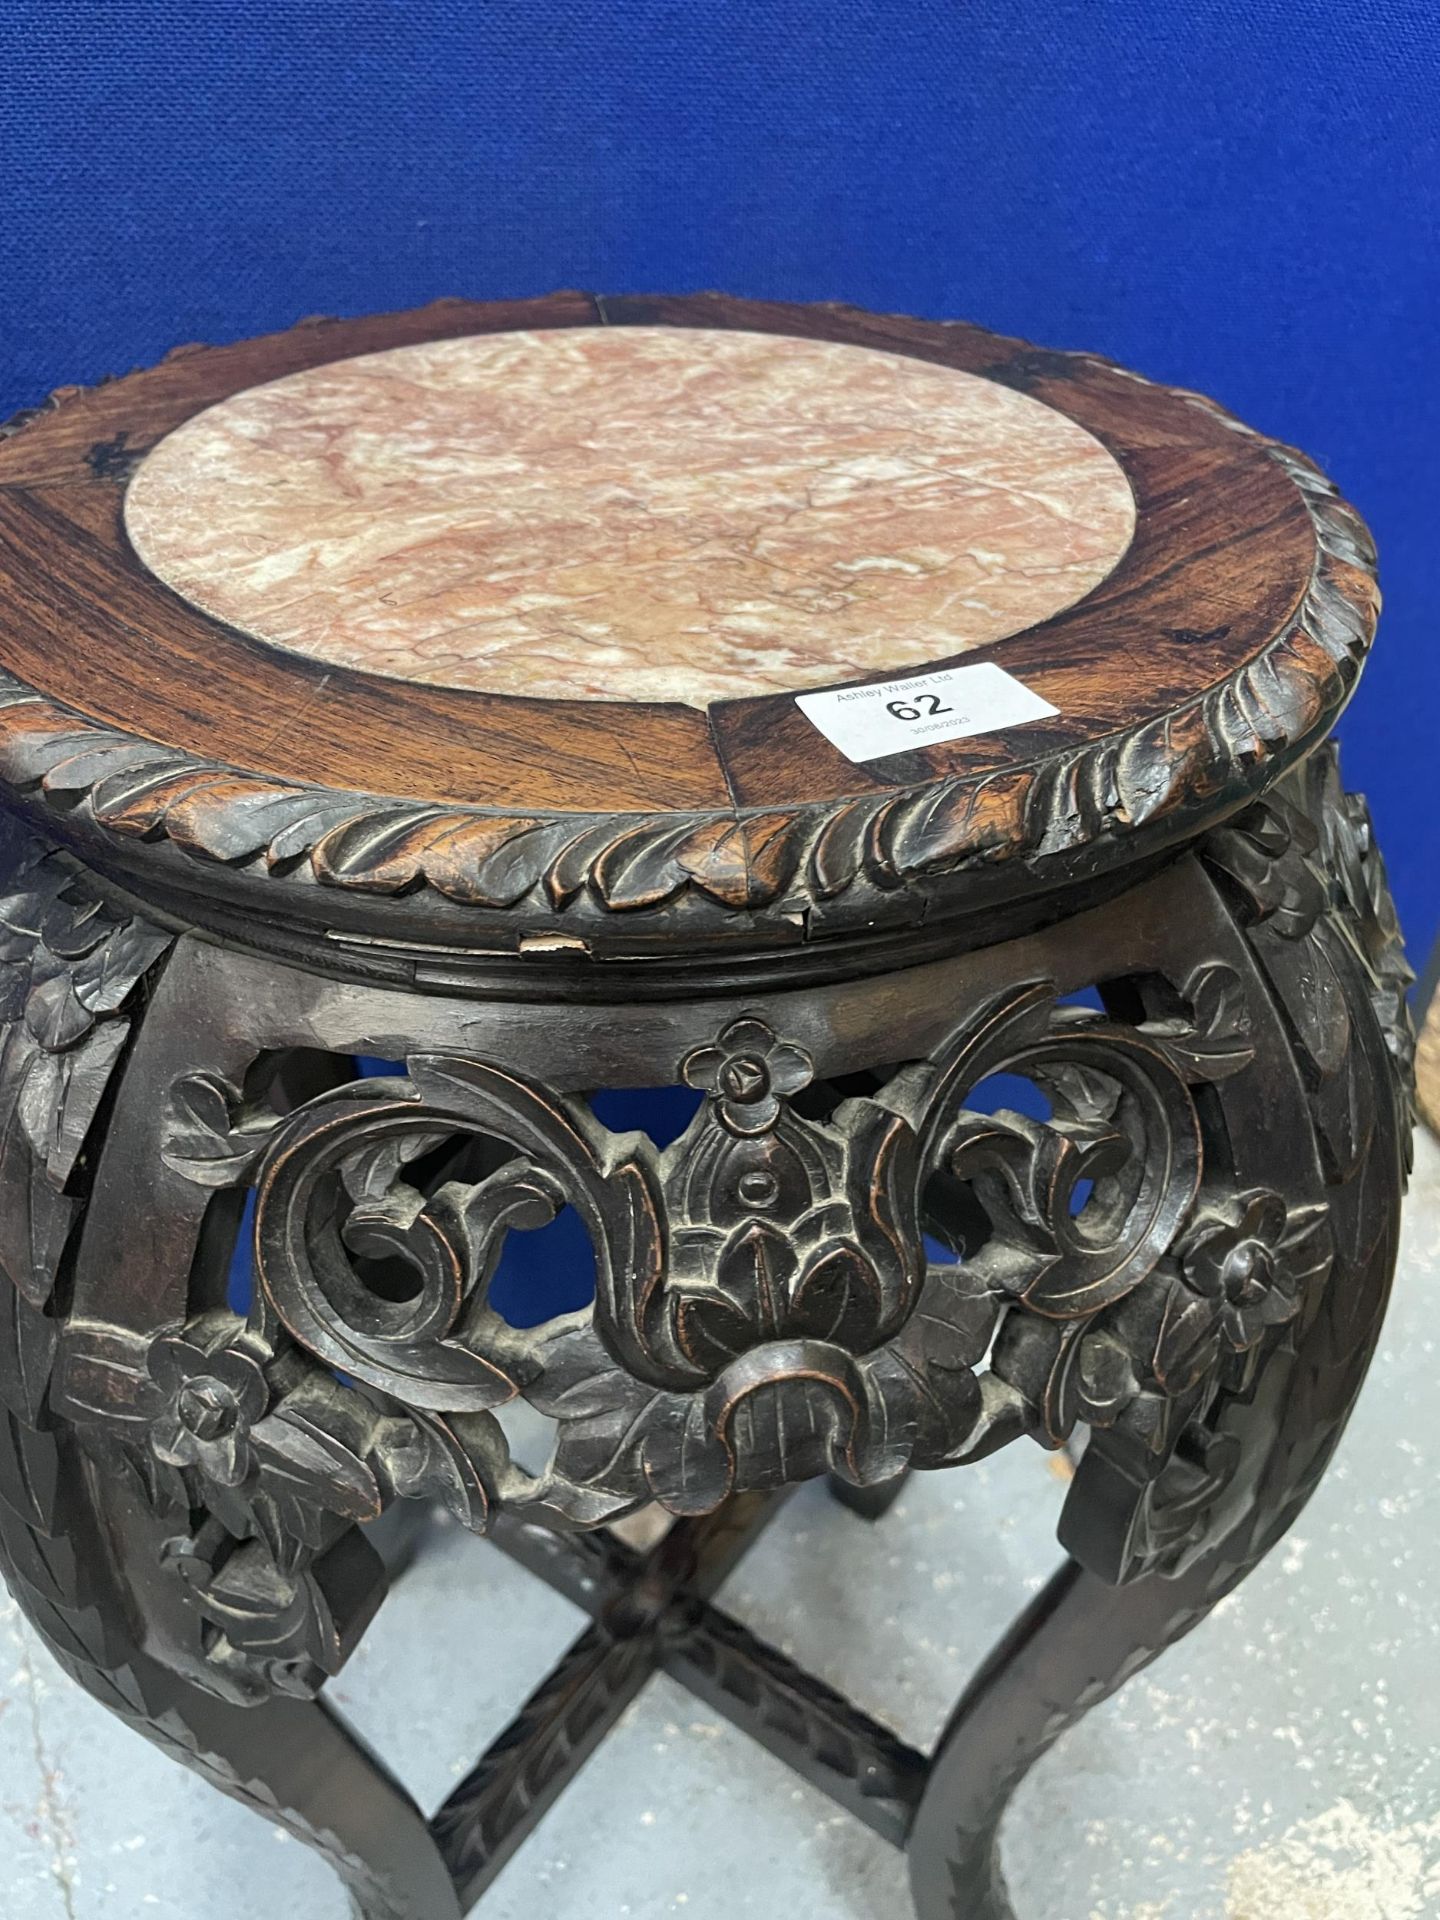 AN ANTIQUE CHINESE CARVED HARDWOOD JARDINIERE STAND WITH MARBLE INSET TOP - Image 4 of 4